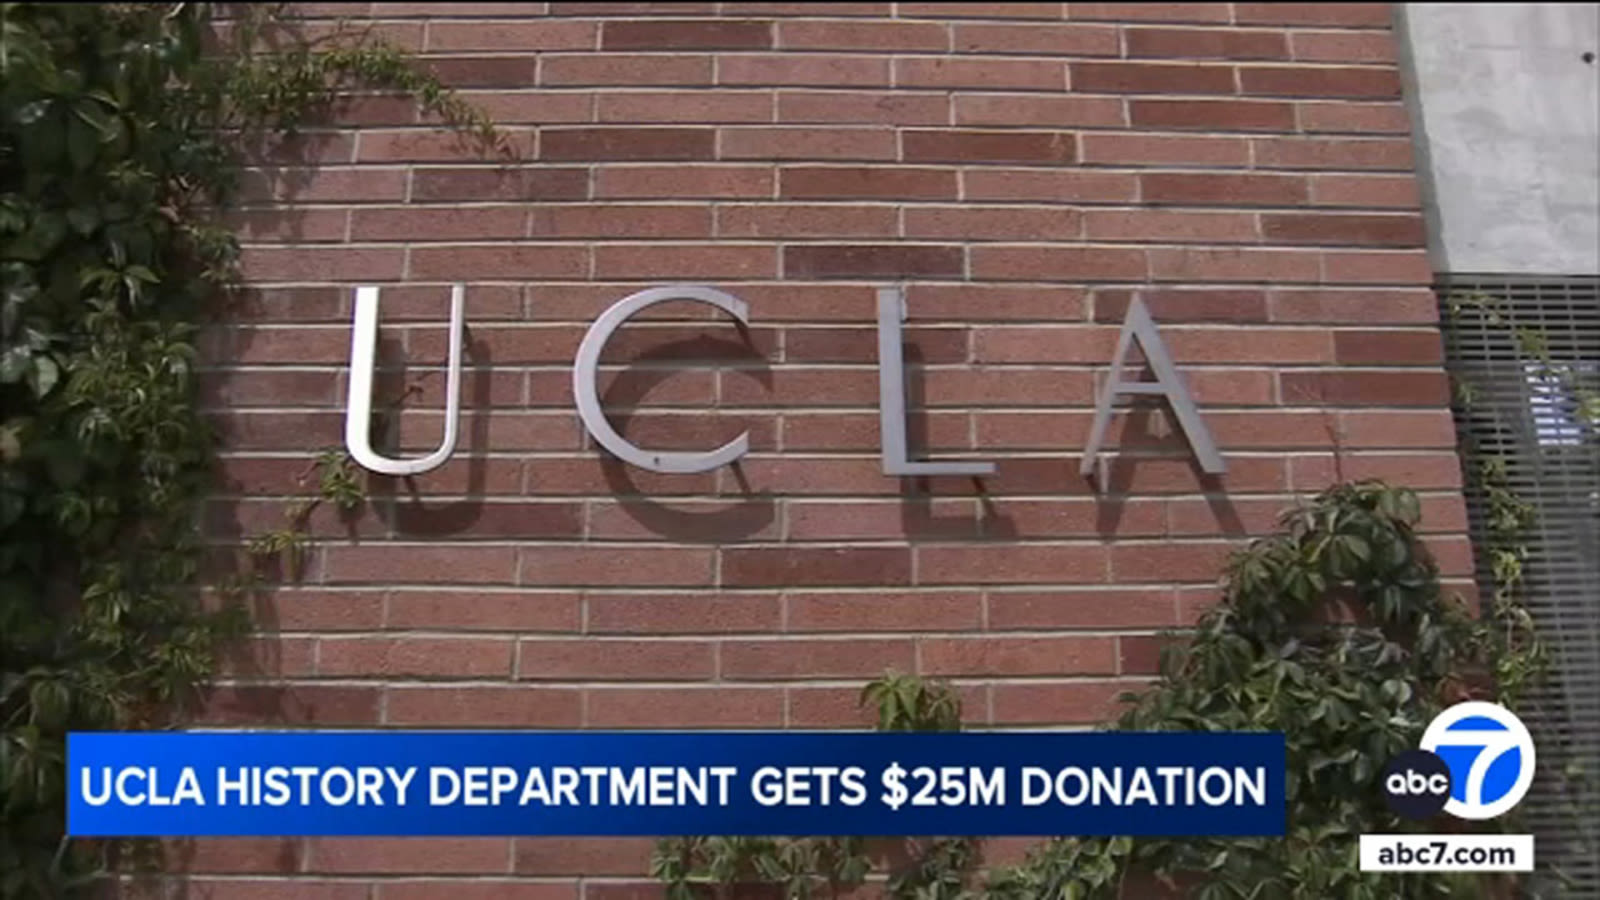 UCLA history department receives $25 million donation from Meyer and Renee Luskin